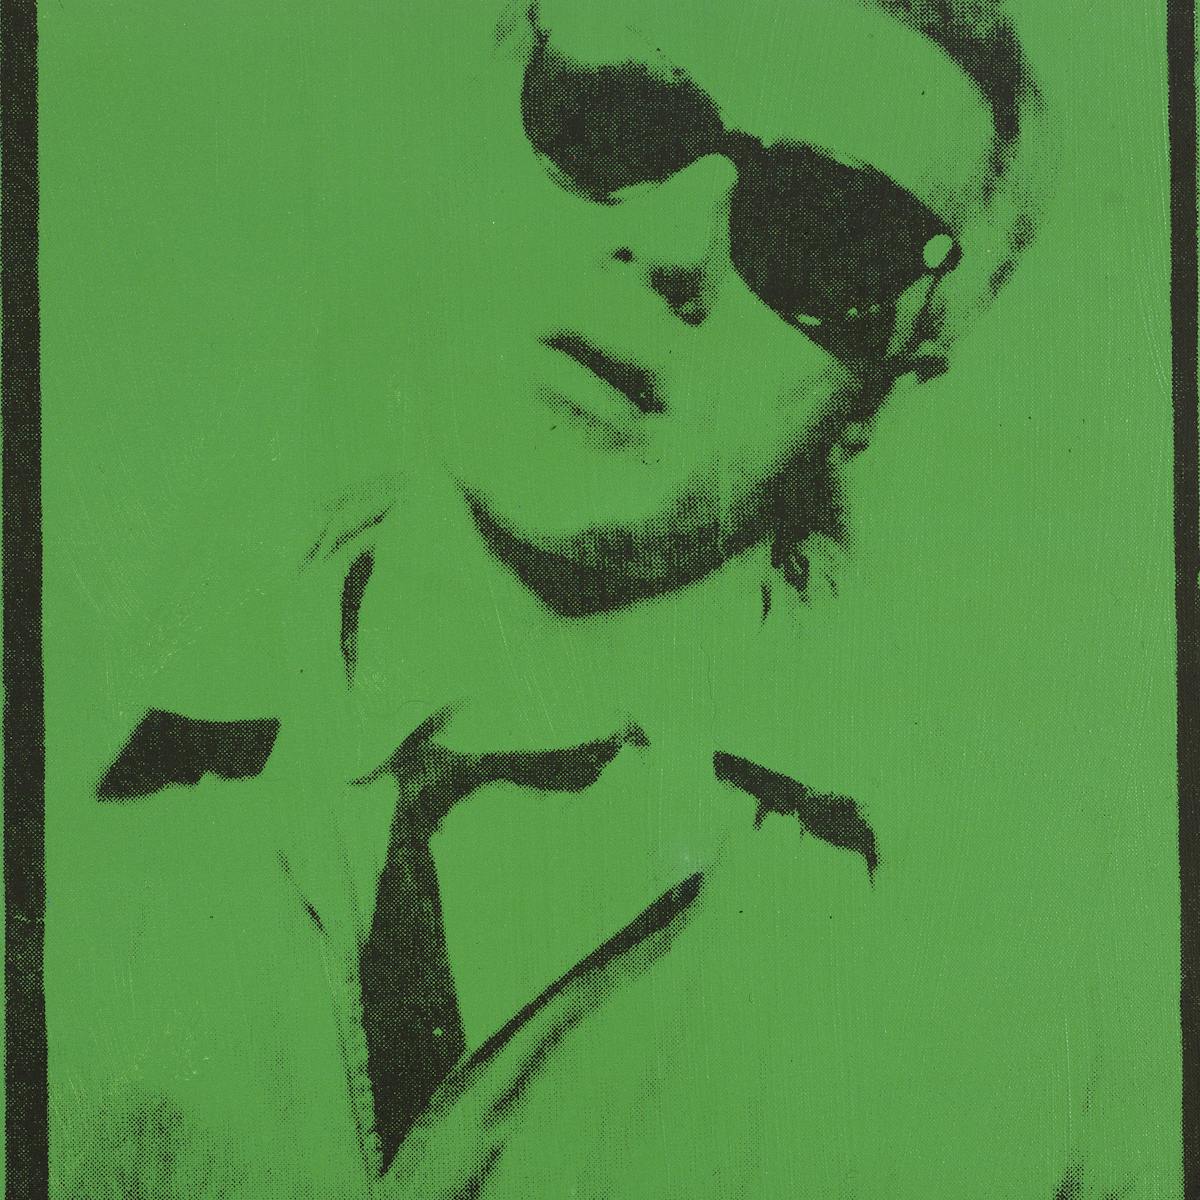 A green print of Andy Warhol in shades.